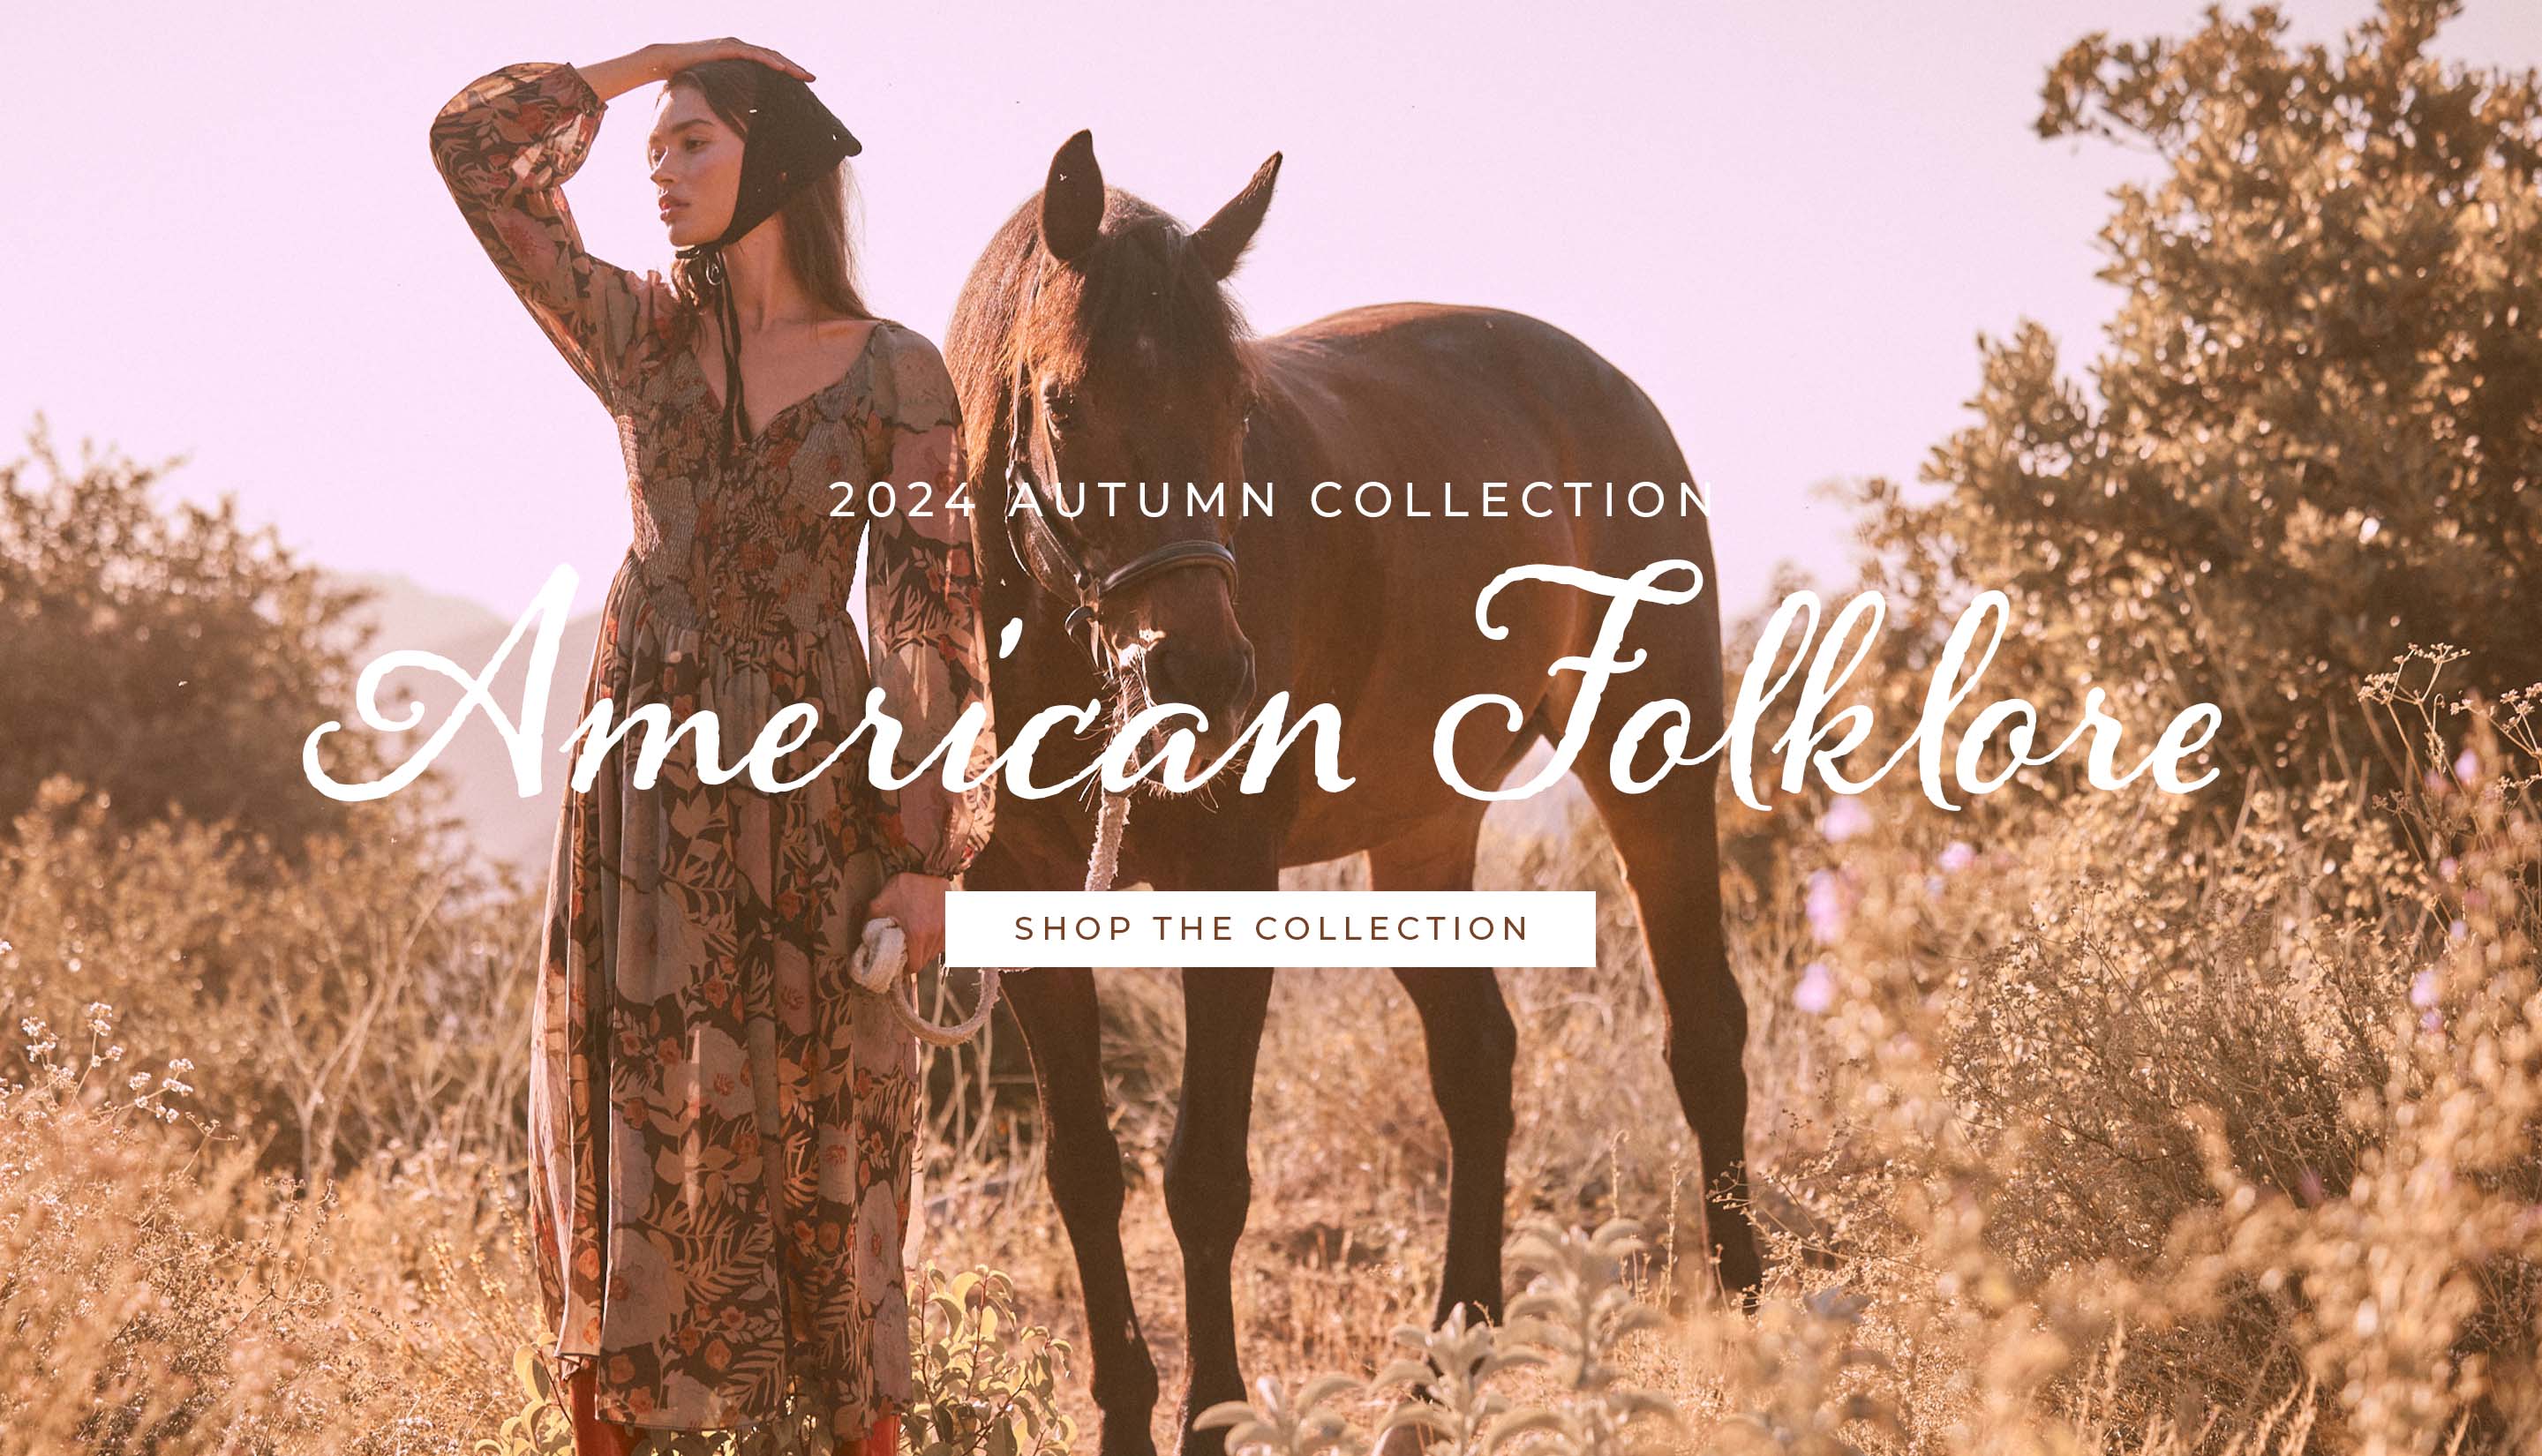 American Folklore 2024 Autumn Collection